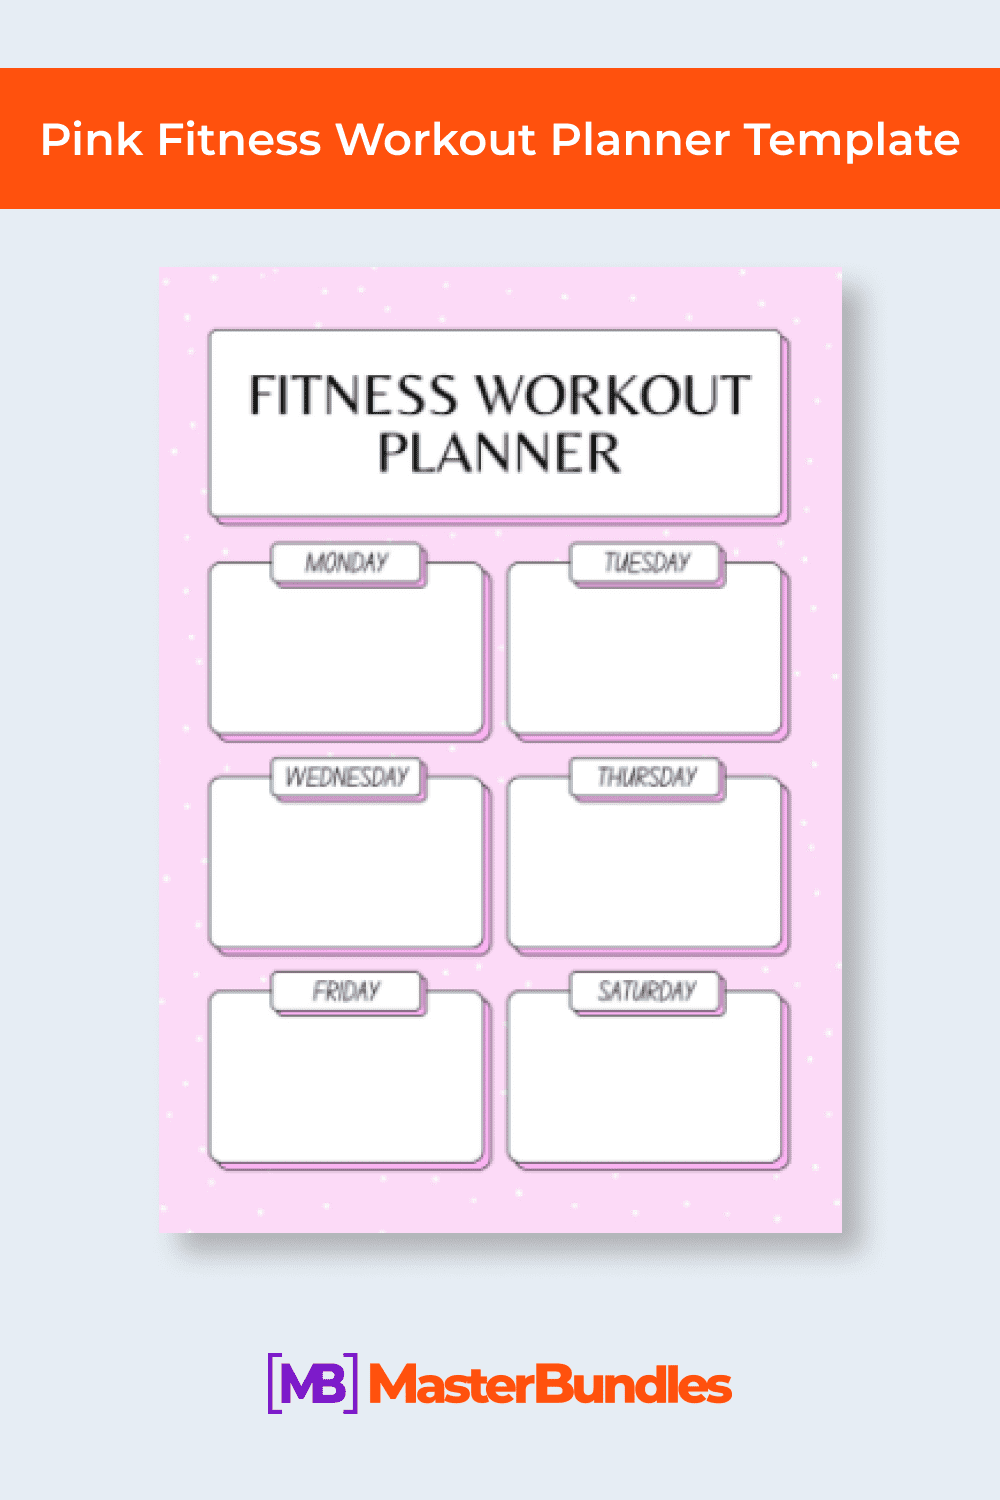 You can plan your fitness time with this beautiful planner.